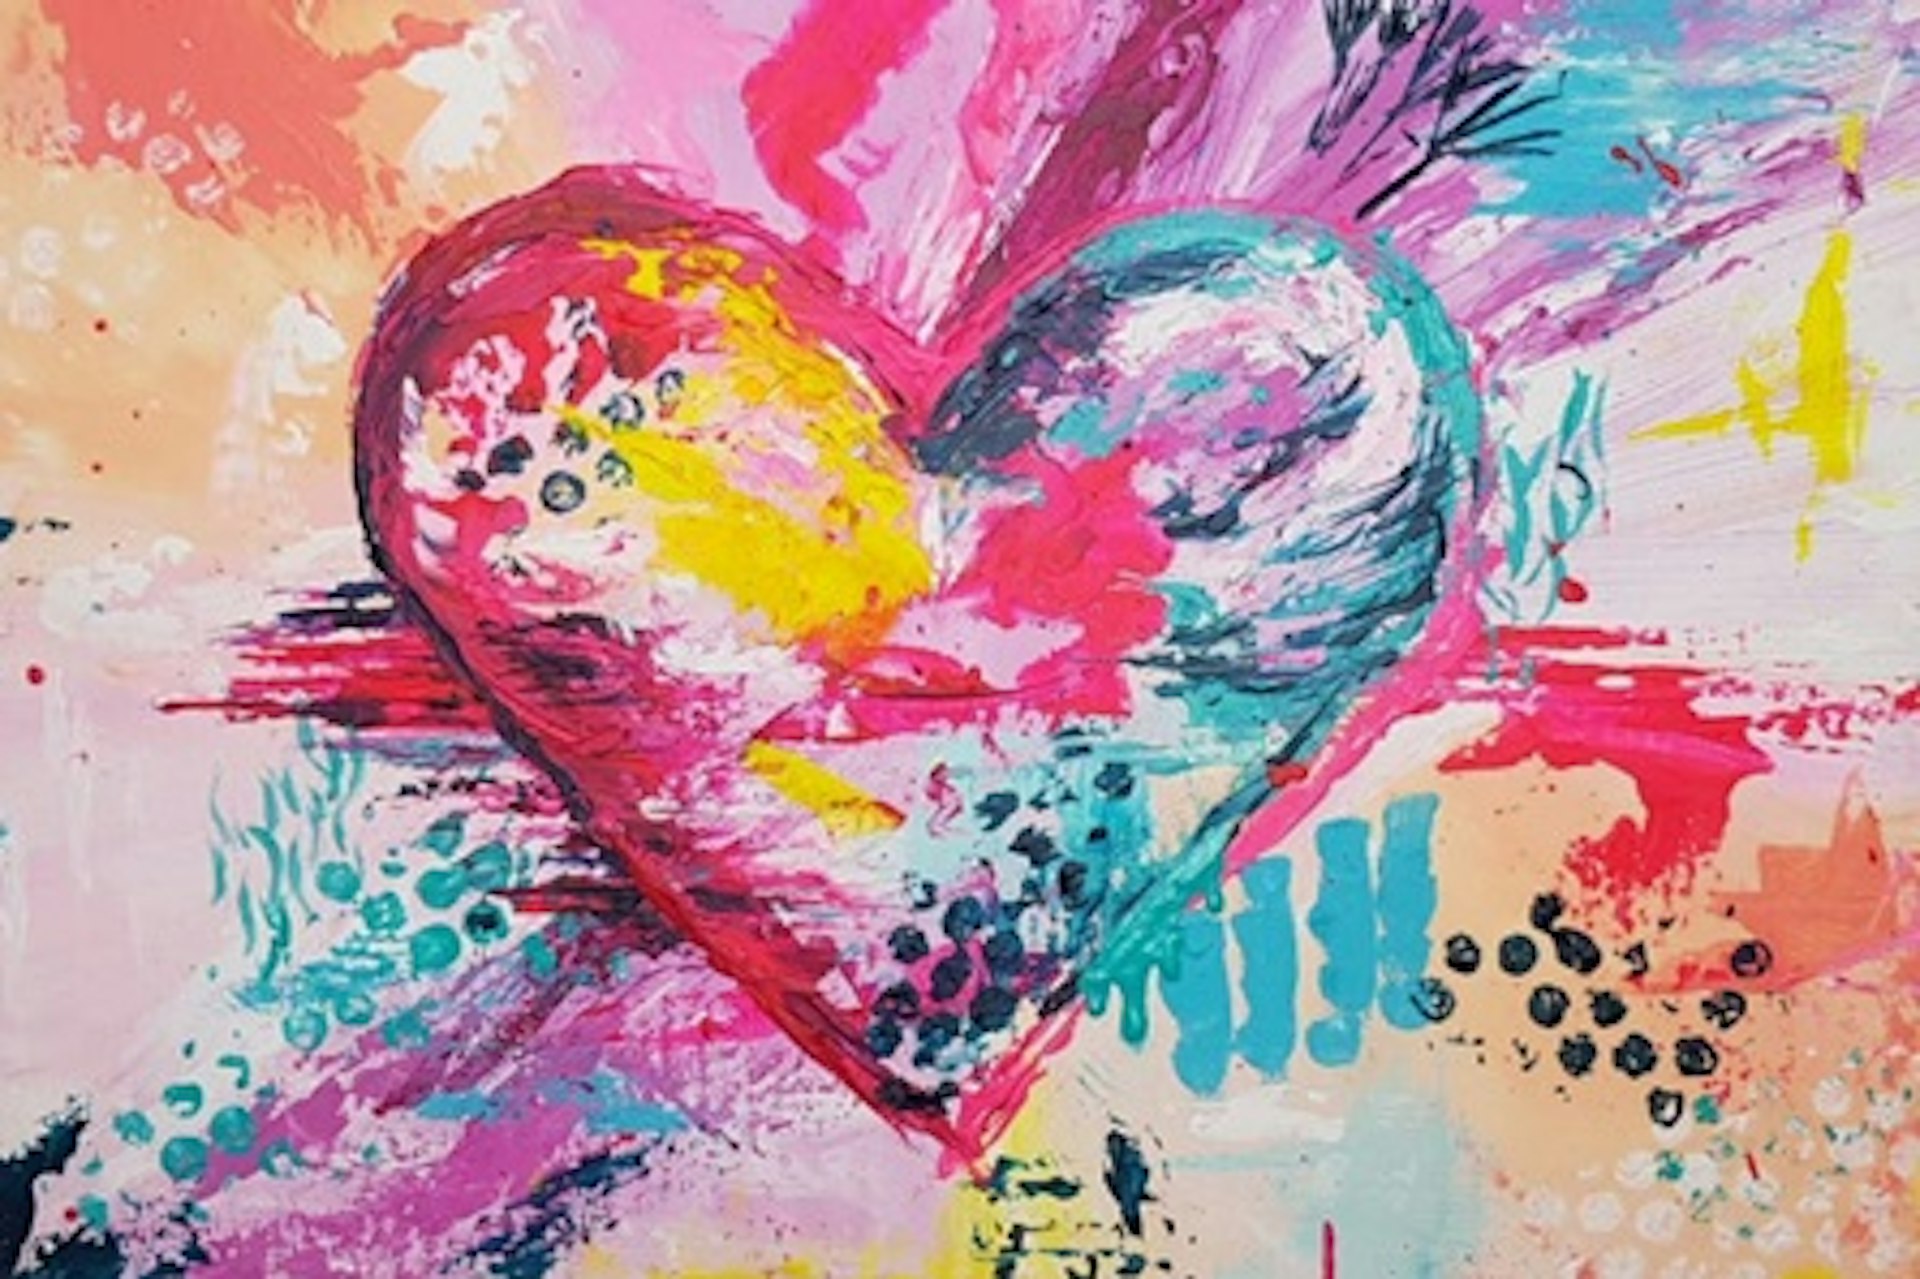 Get Creative Together - Date Night Live Virtual Art Experience with Drinks for Two with Art Sippers 3